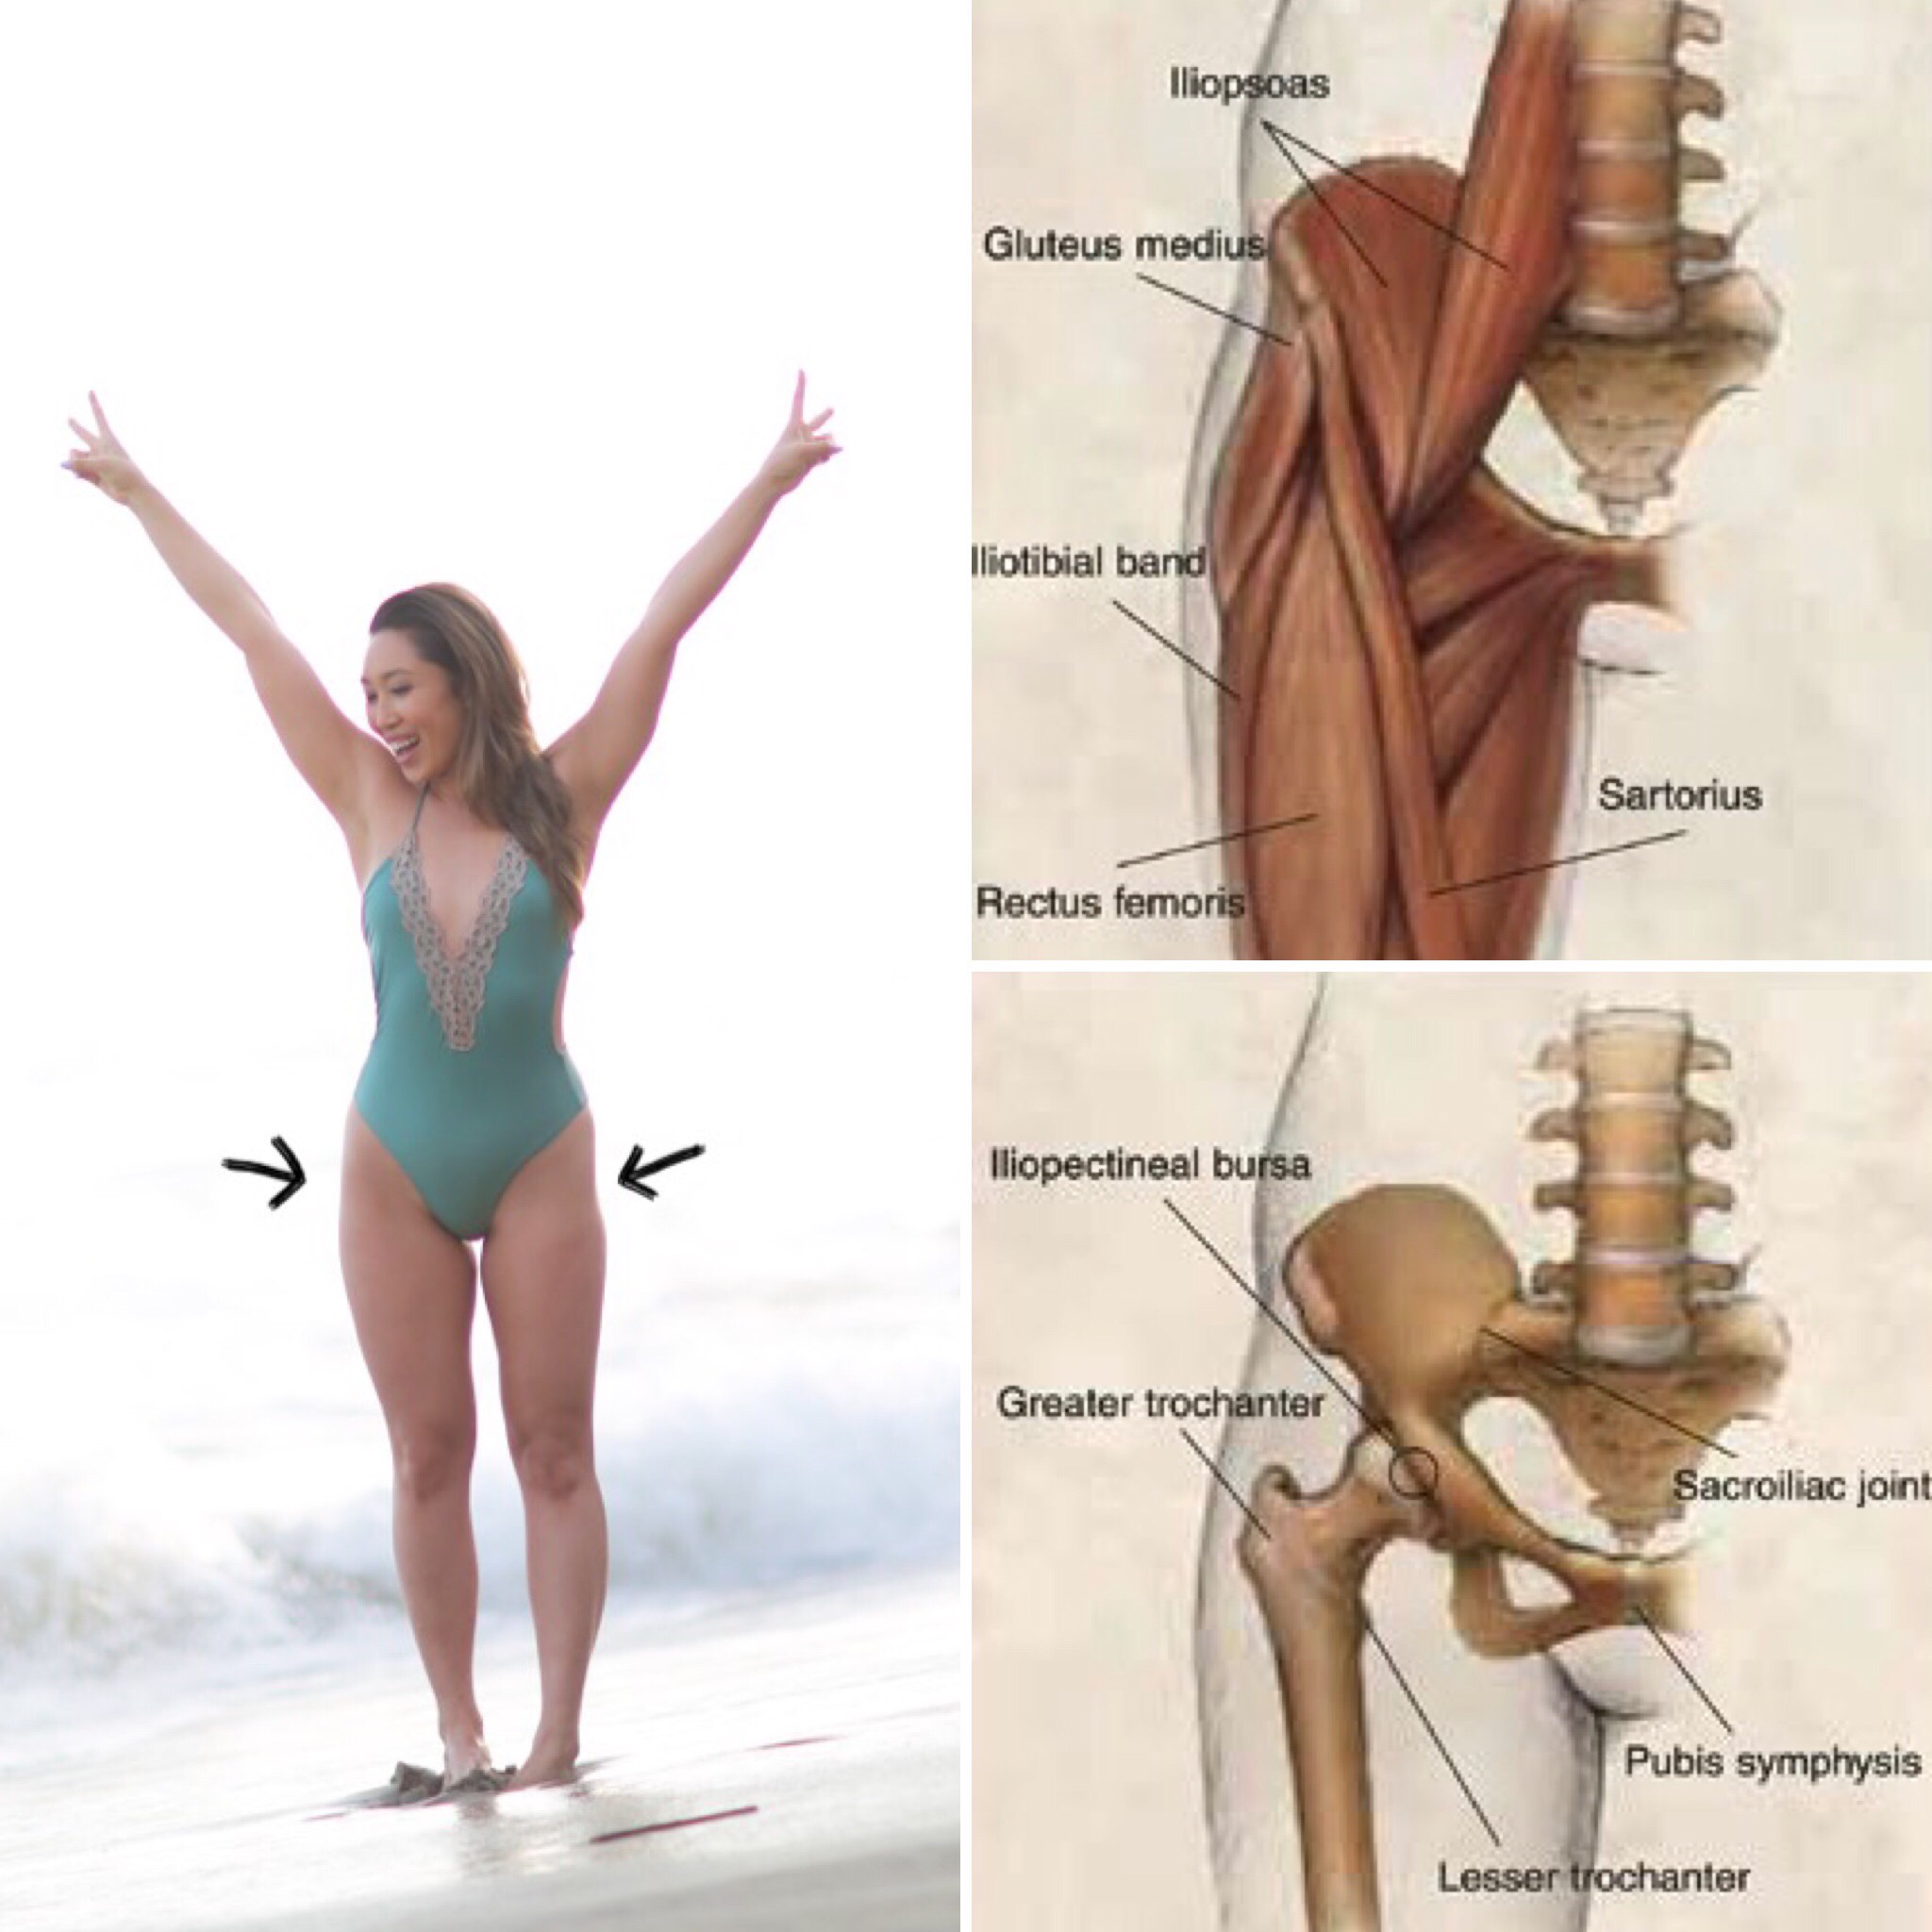 the anatomy of hip dips and picture of cassey ho showing where hip dips occur